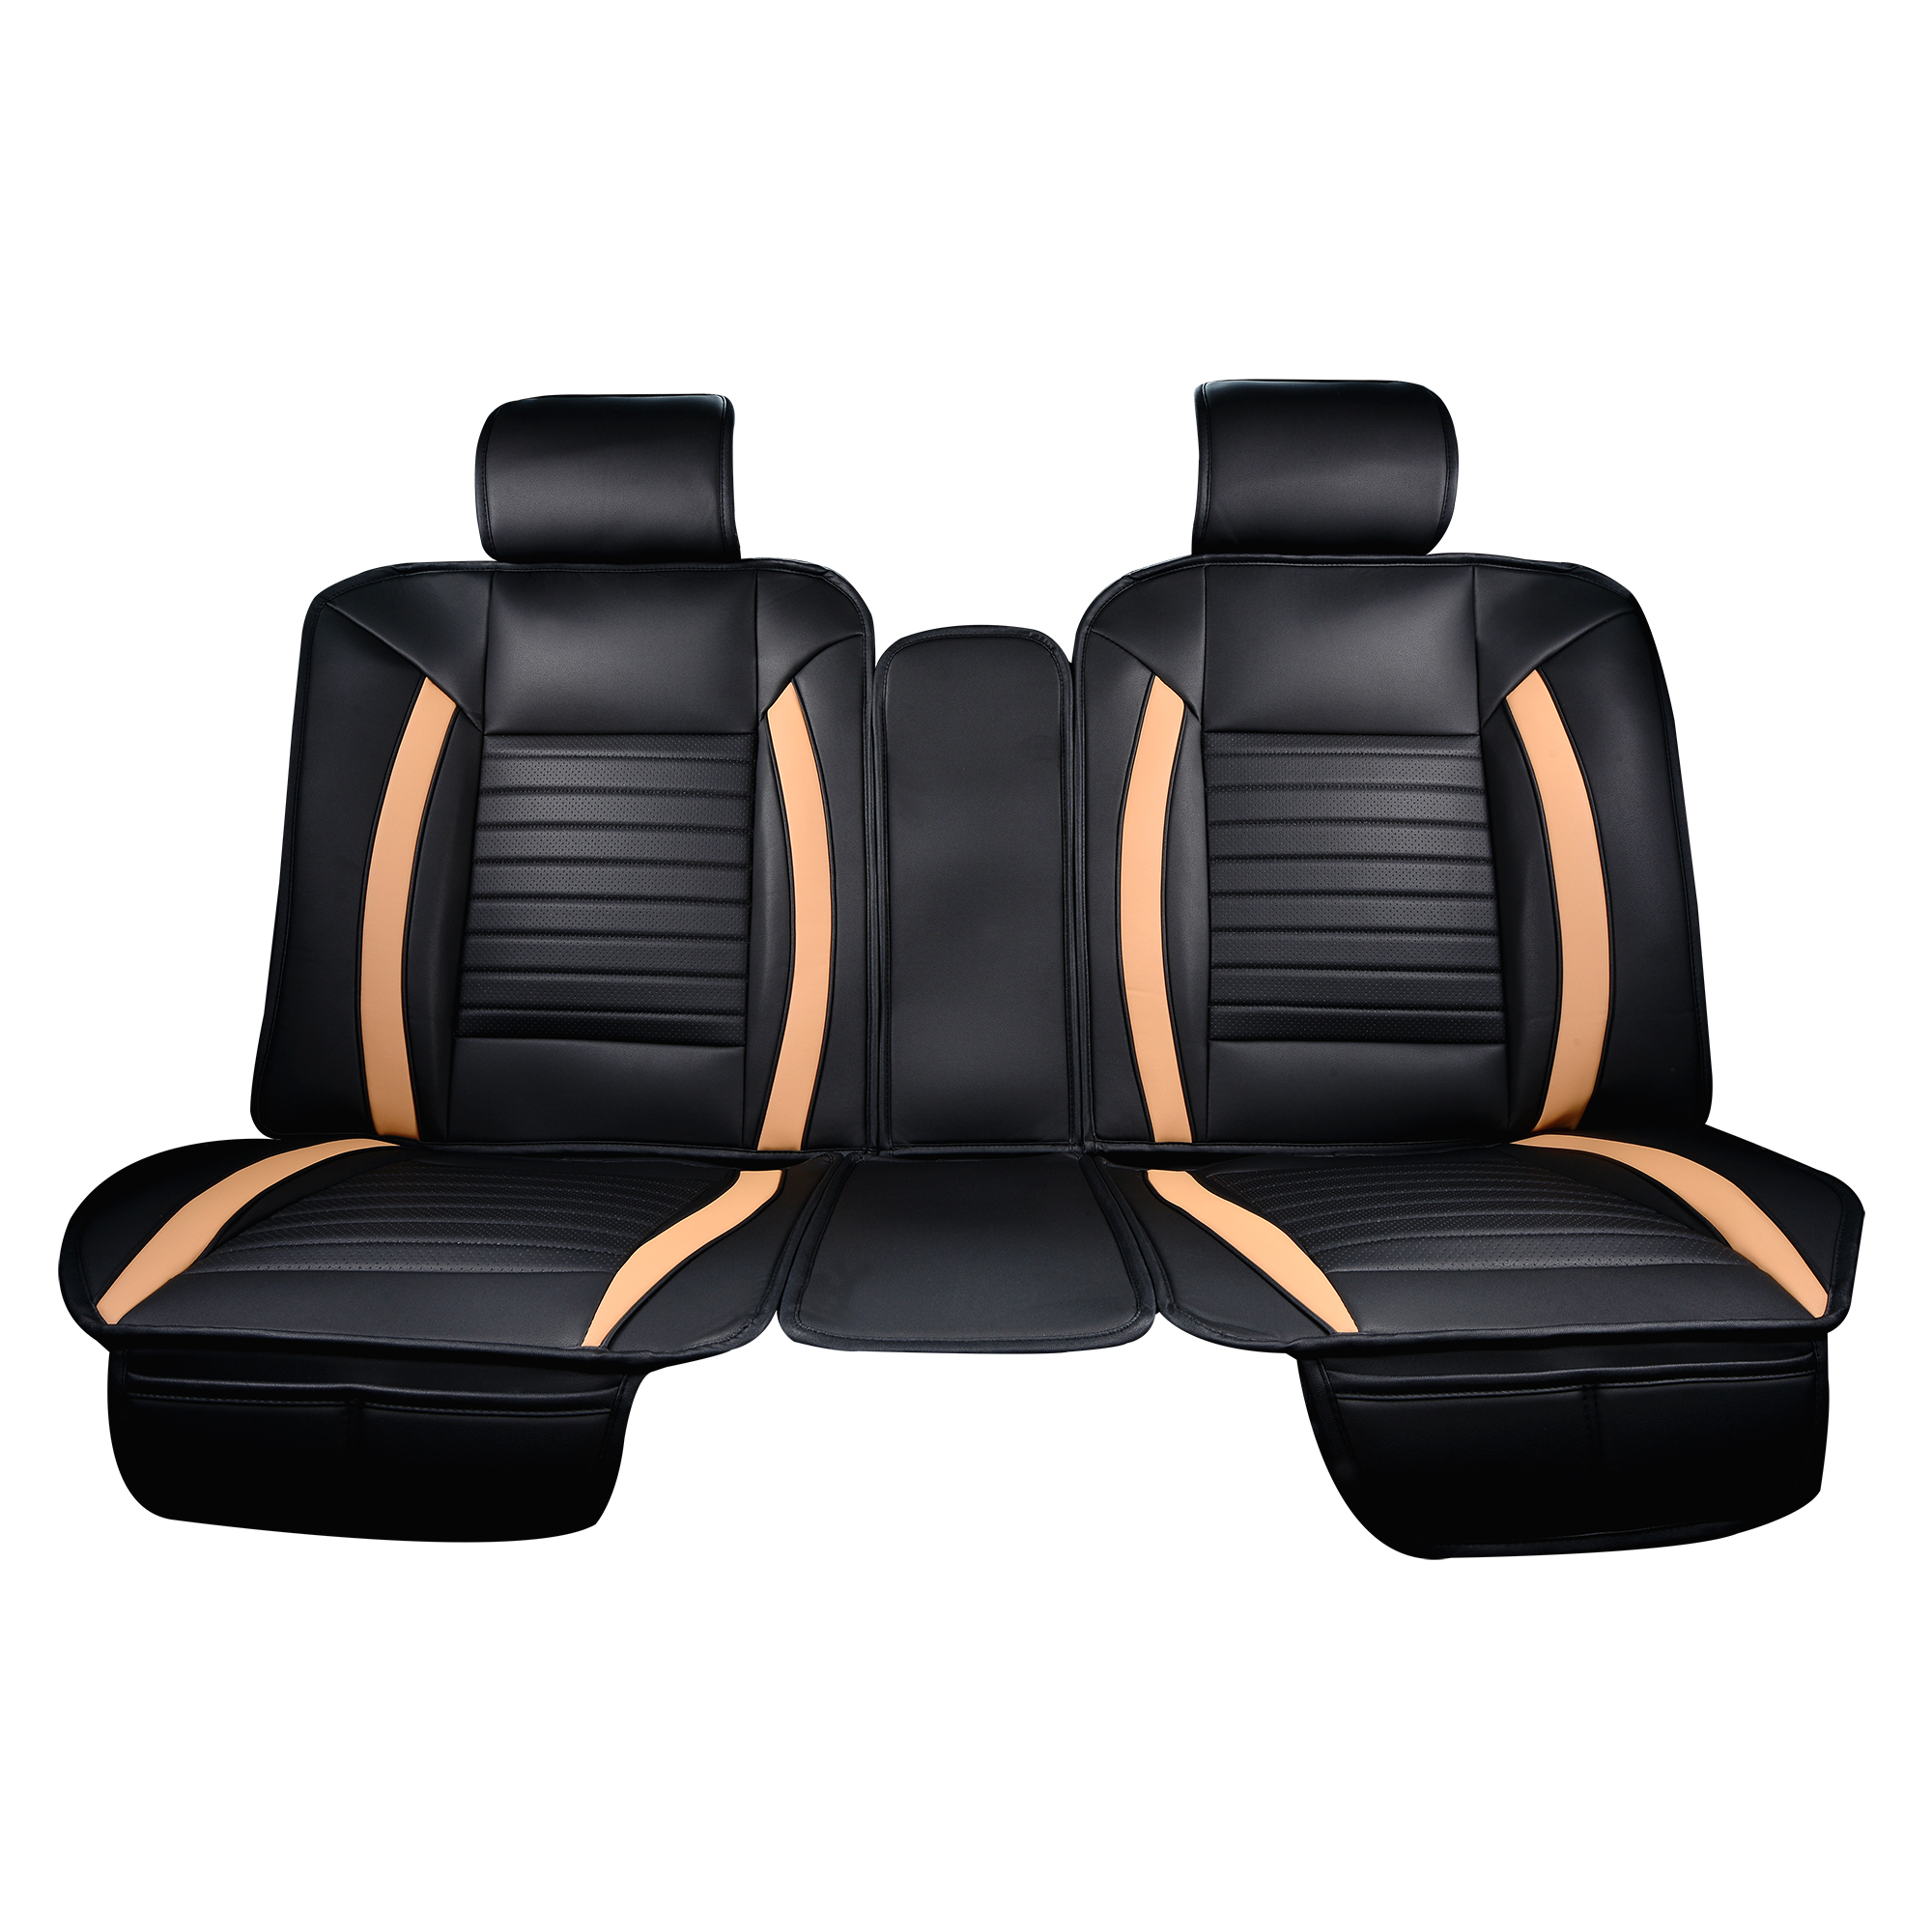 Luxury Series Tan Car Rear Seat Cover | Auto Seat Covers | Masque